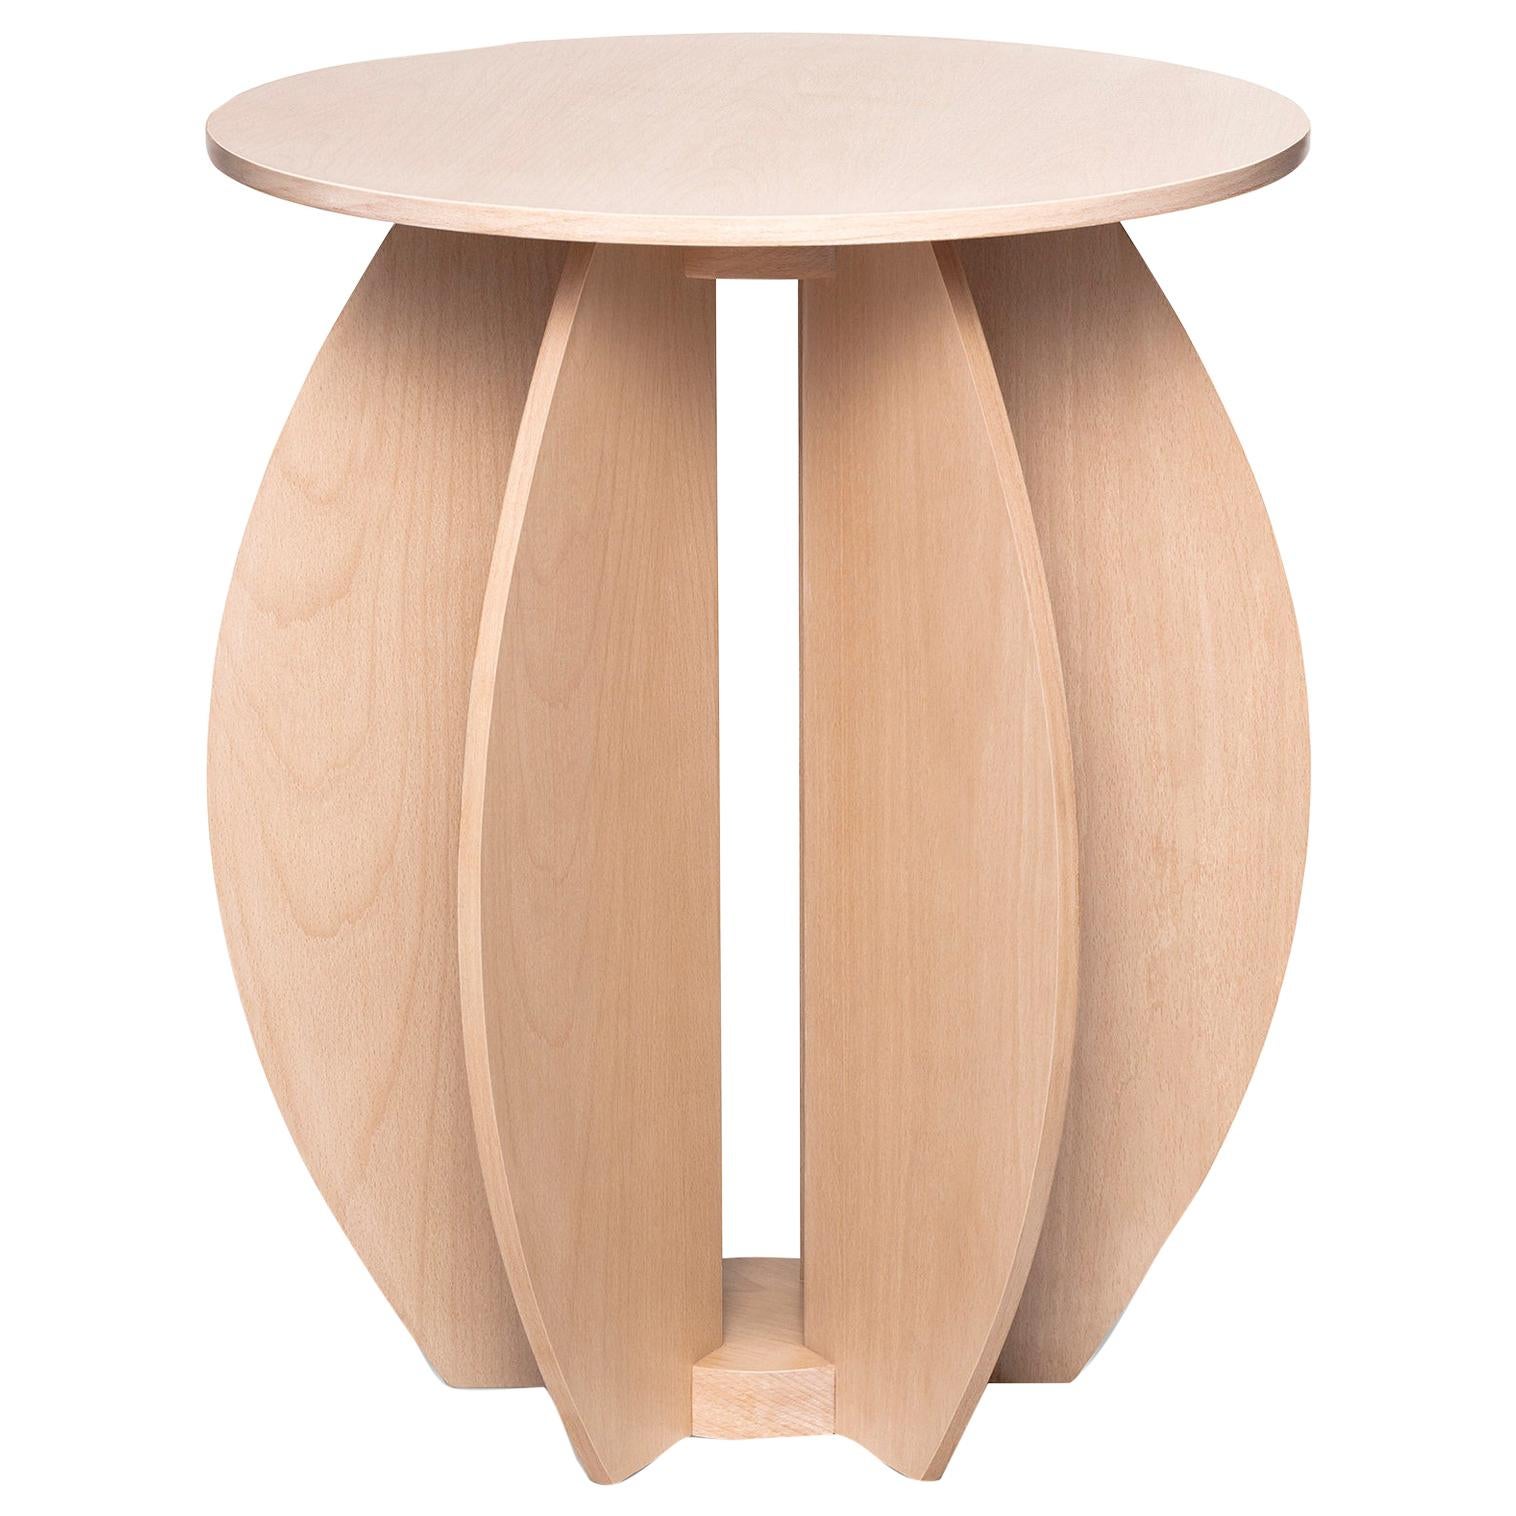 Contemporary Round Side Table in Solid Wood with Matte Natural Finish